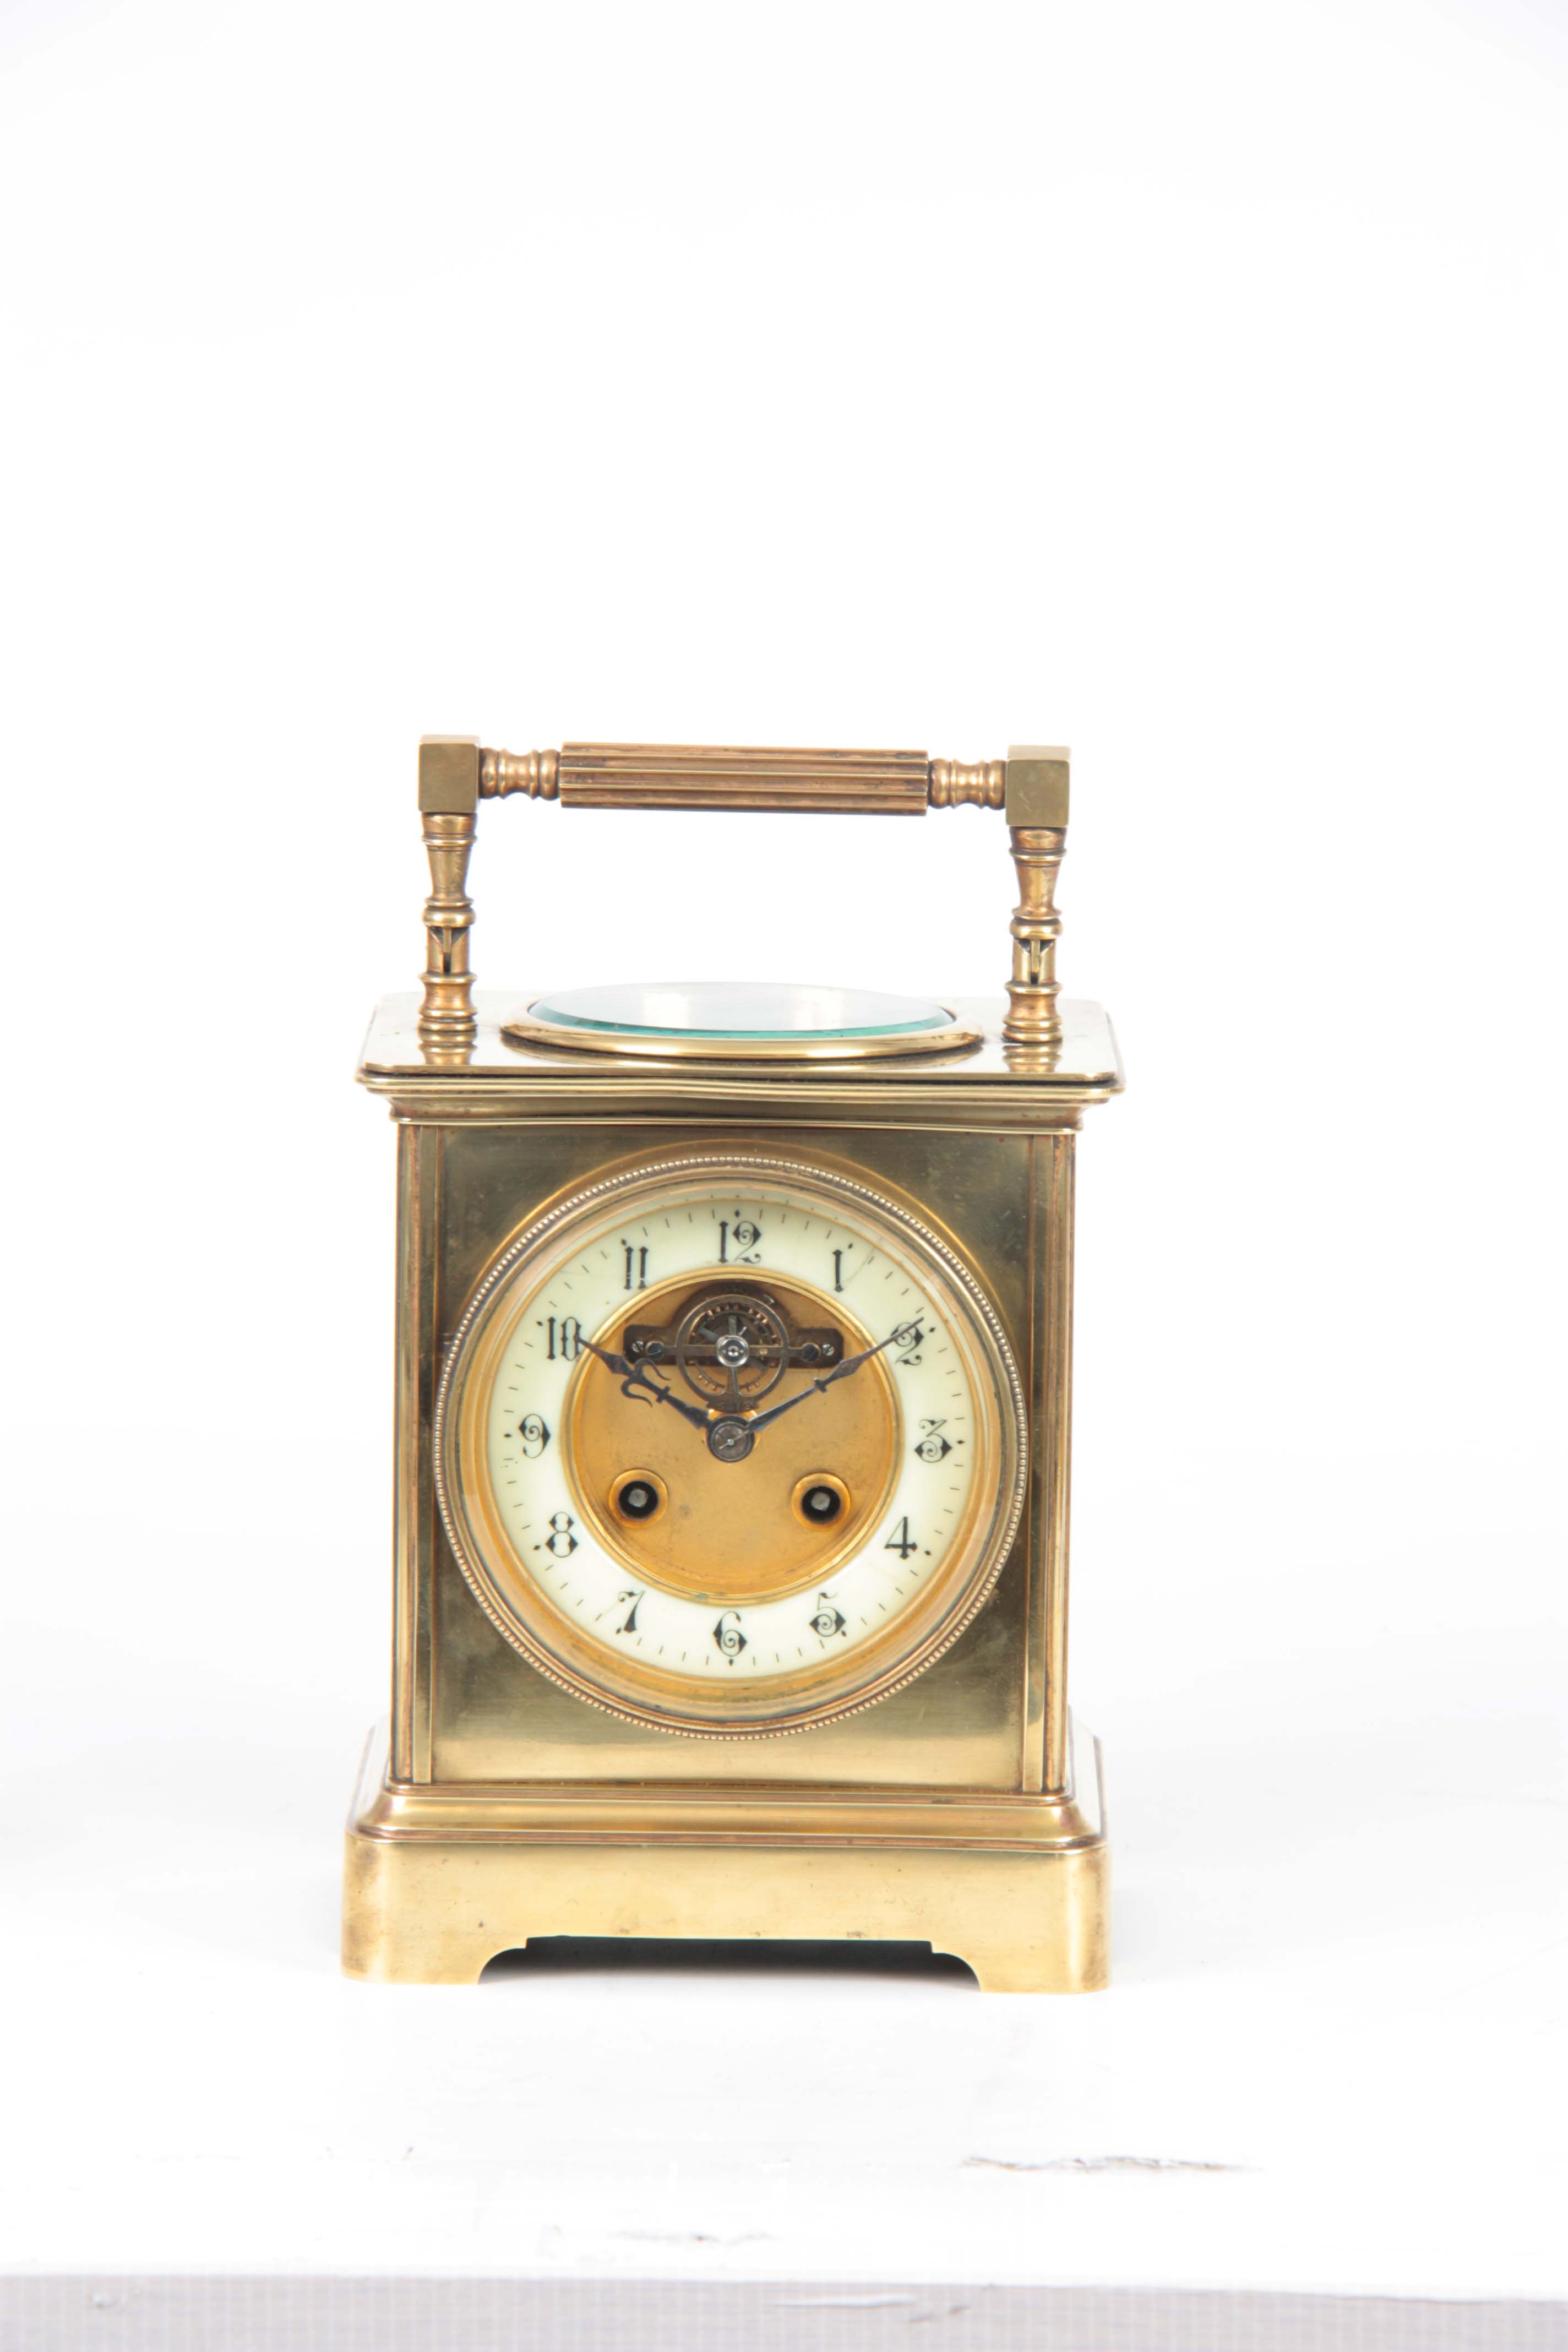 A LARGE LATE 19TH CENTURY FRENCH CARRIAGE STYLE MANTEL CLOCK the brass case surmounted by a reeded - Image 2 of 6